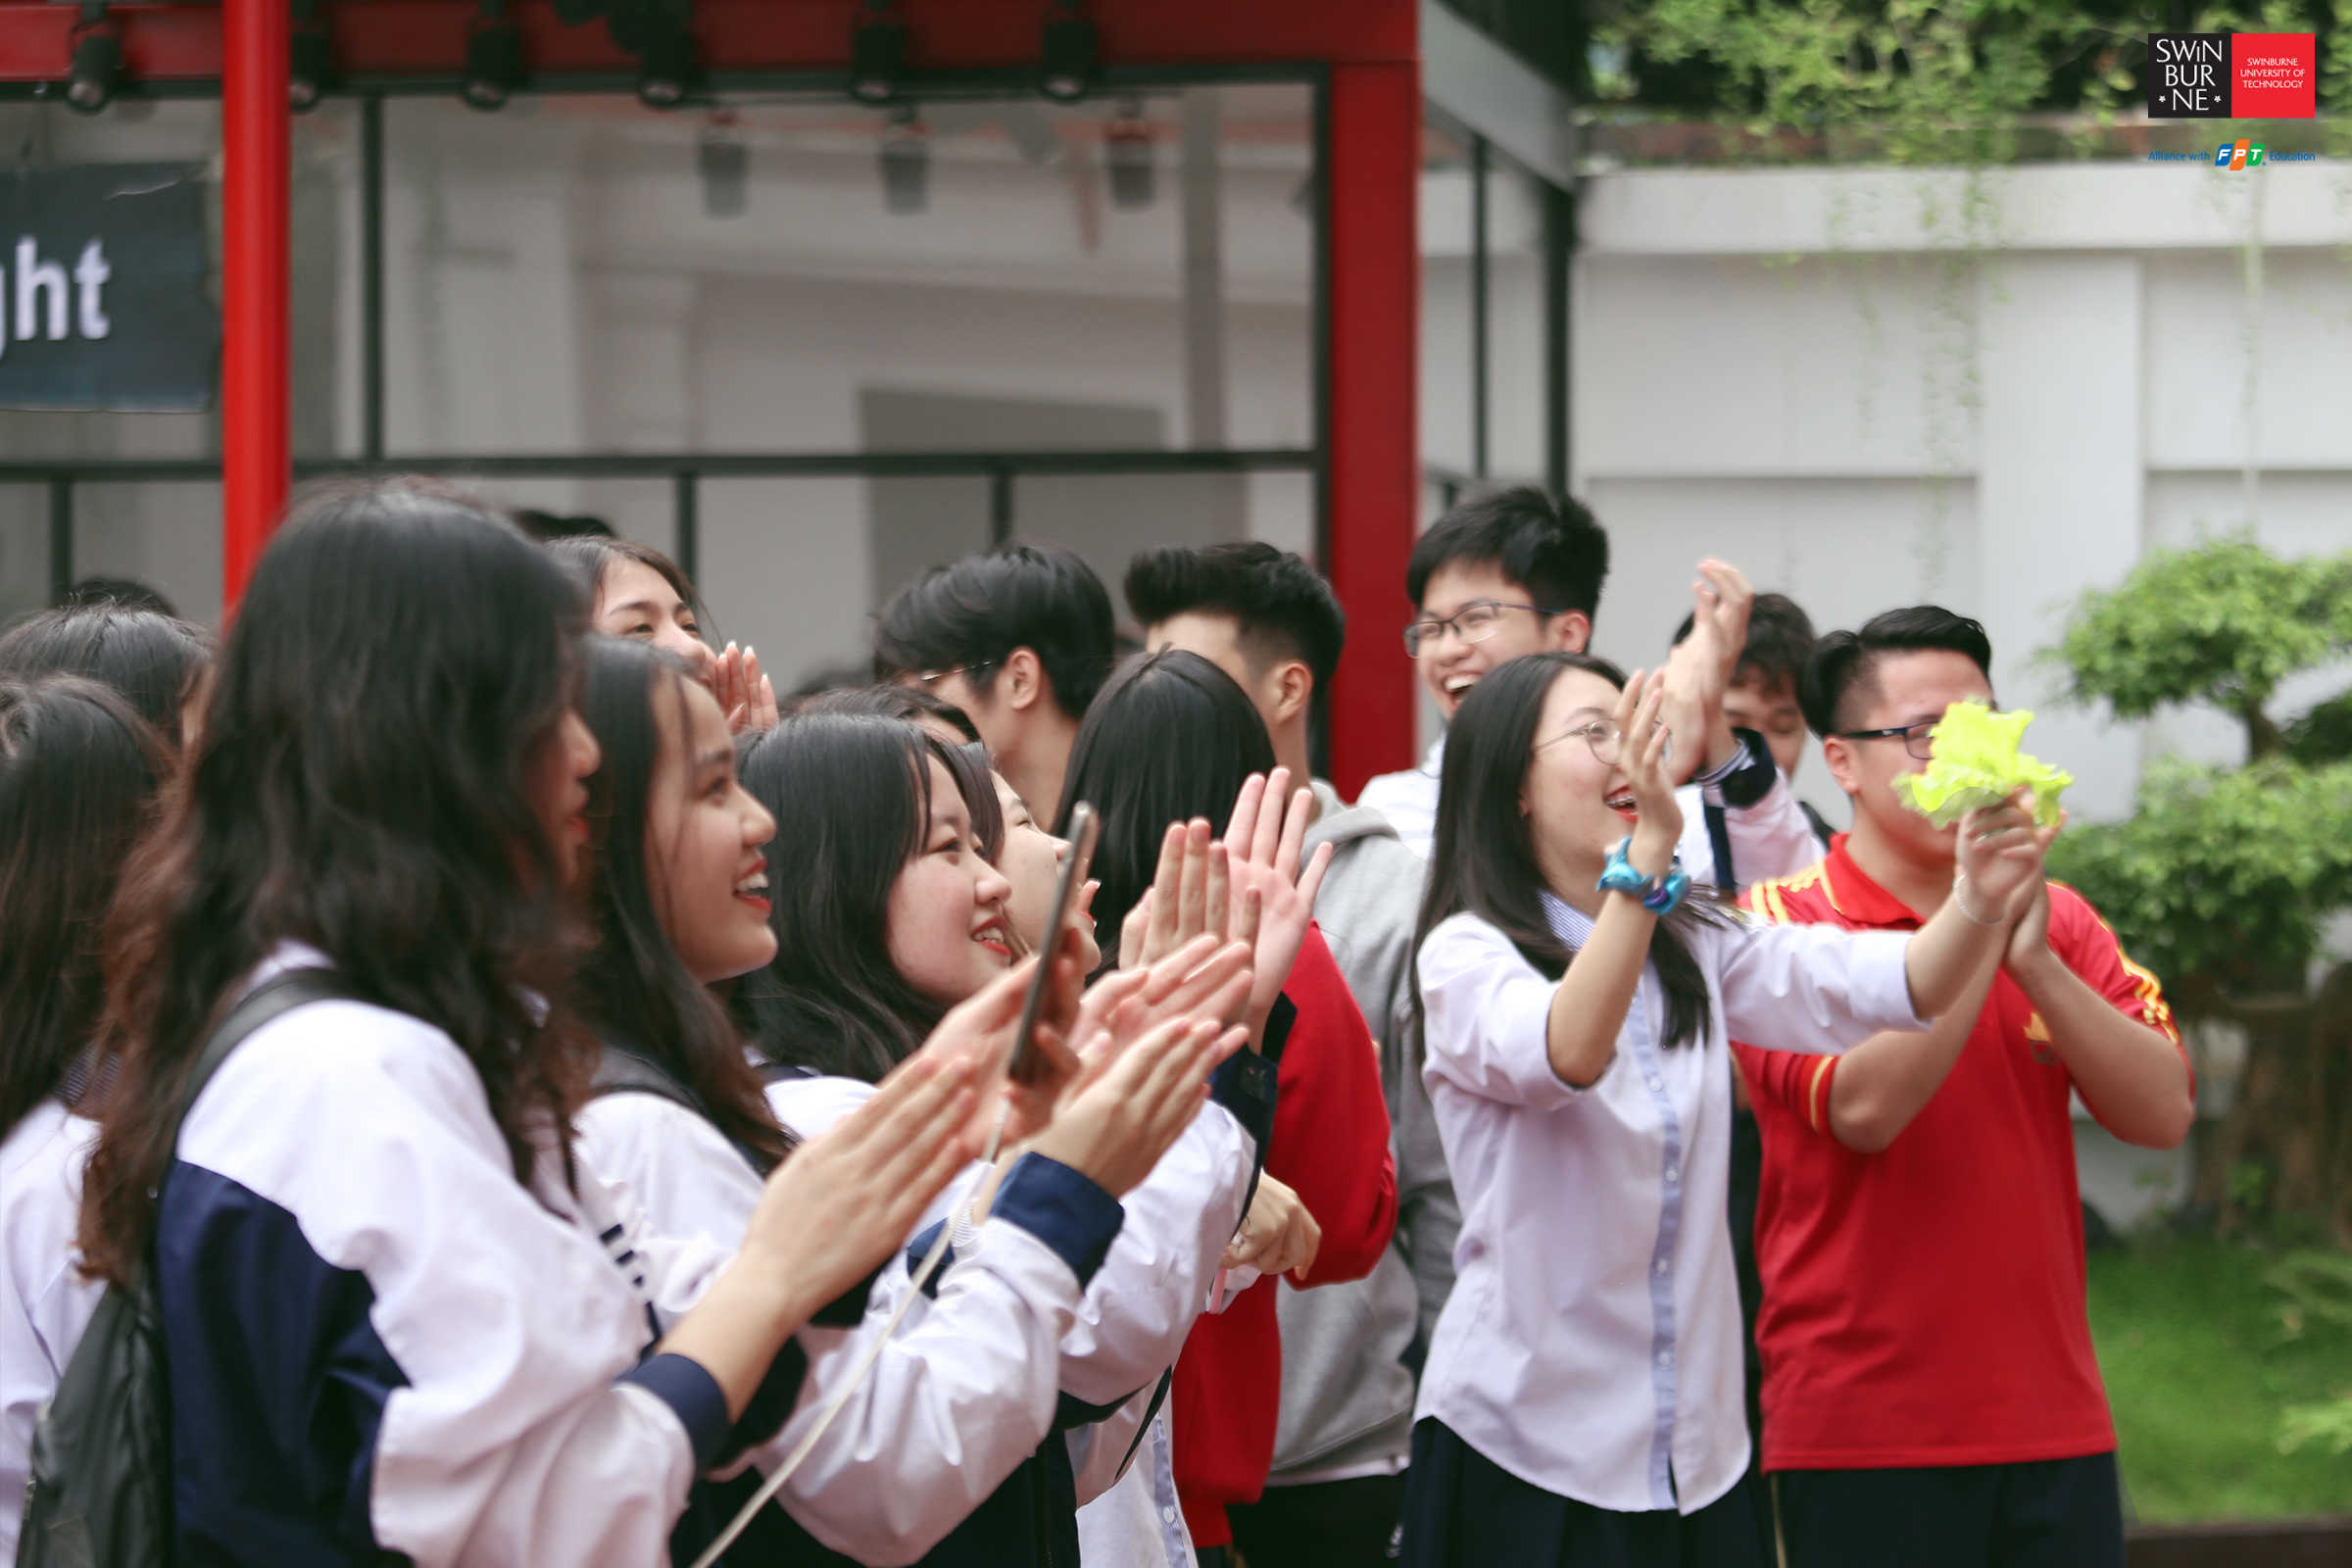 https://swinburne-vn.edu.vn/en/event/life-experience-series-party-with-high-school-students/